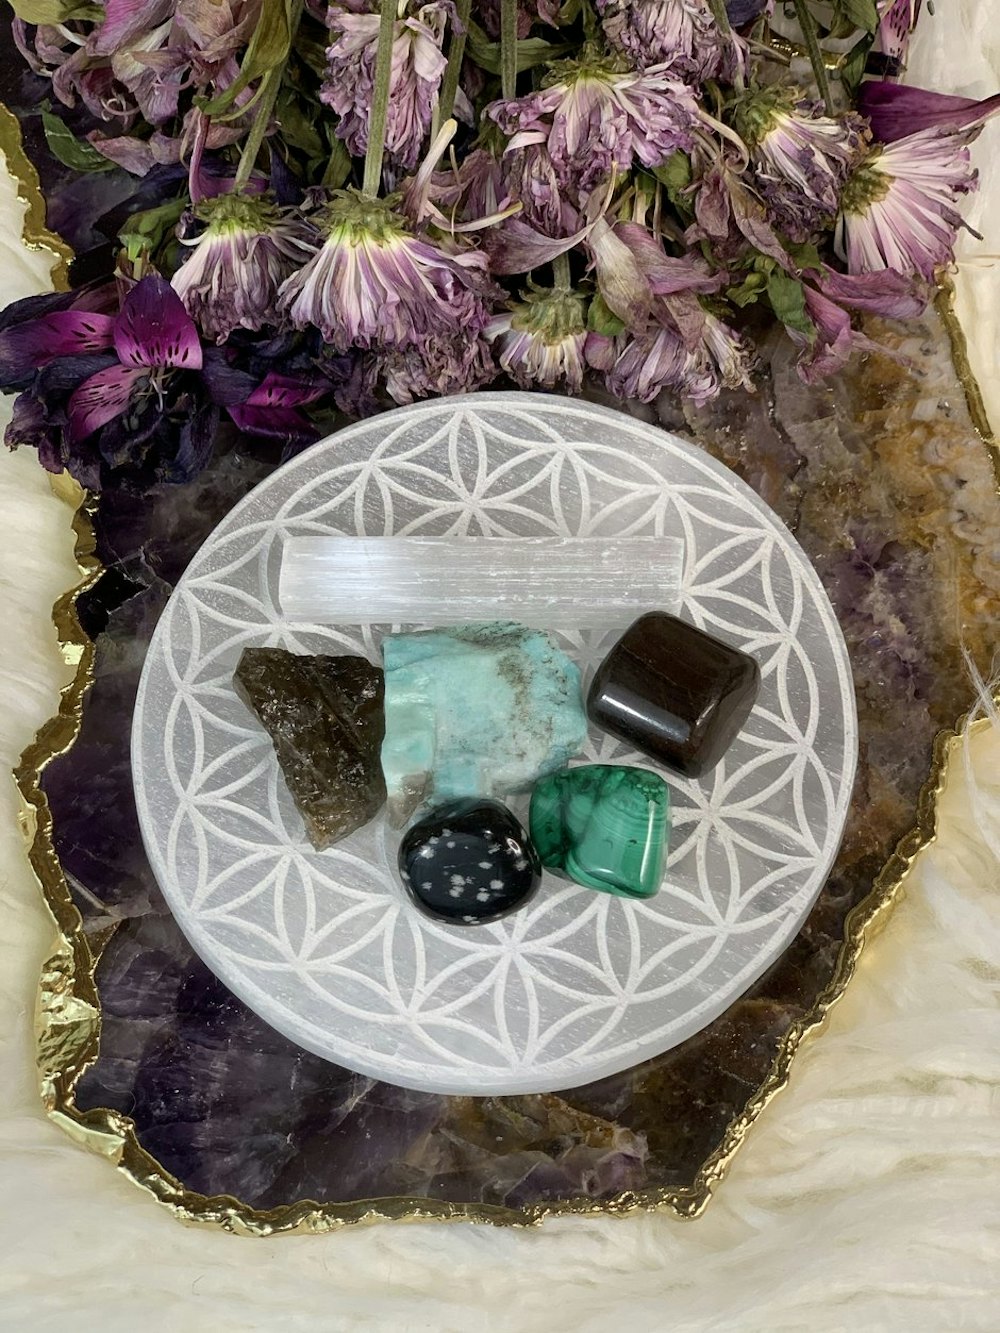 Crystals for Capricorn